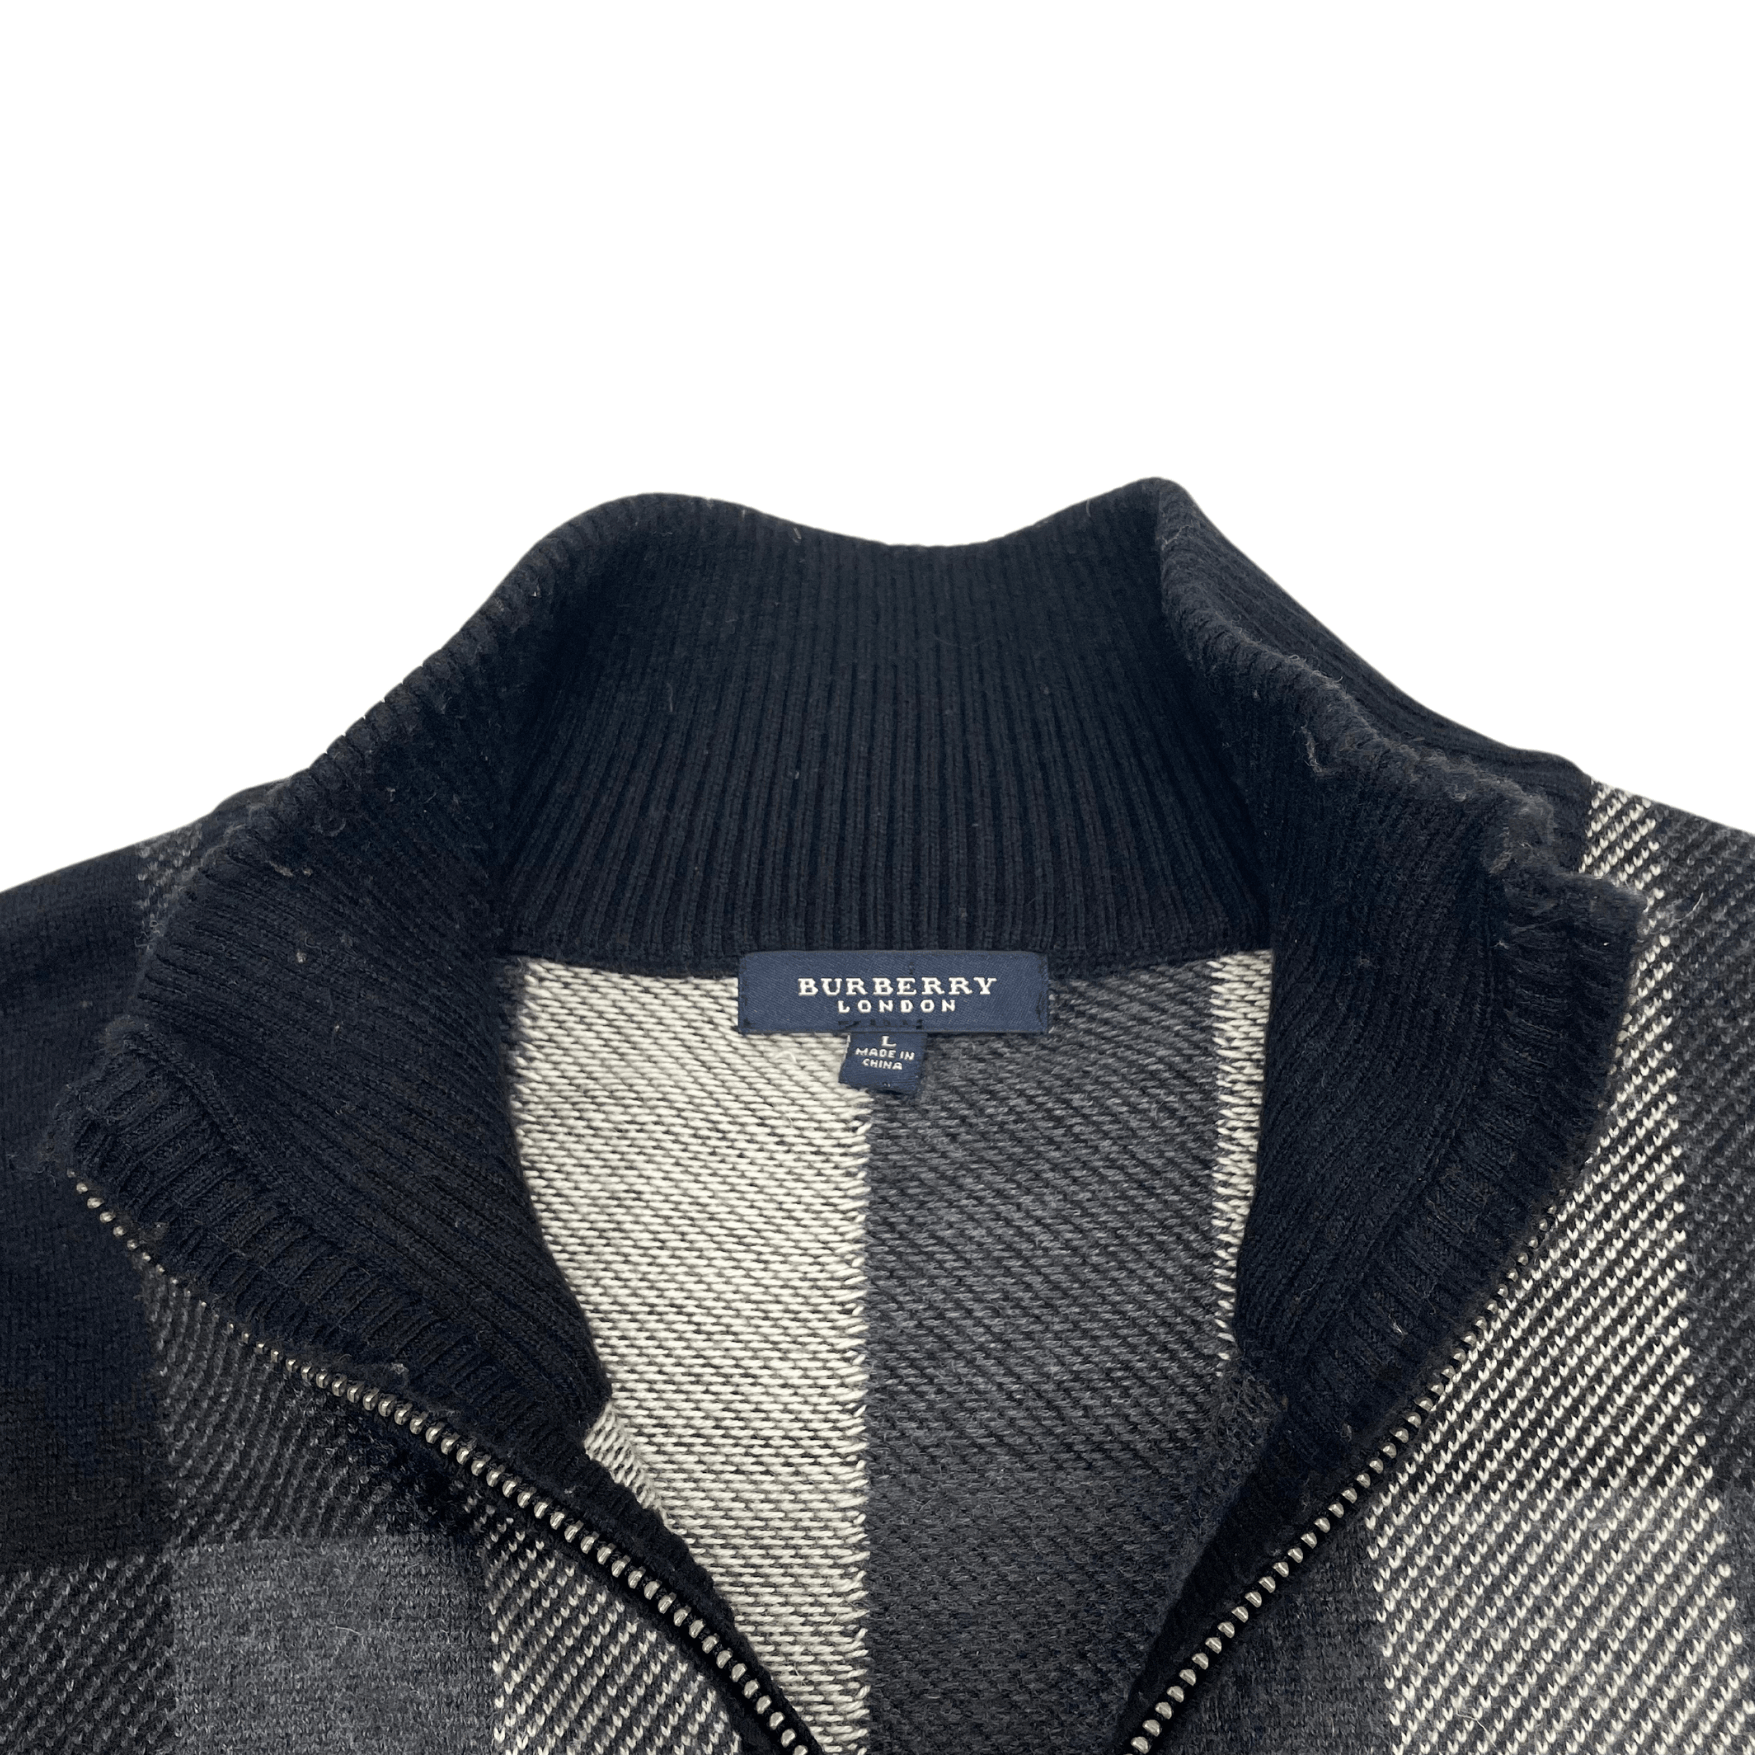 Burberry Sweater - Men's L - Fashionably Yours